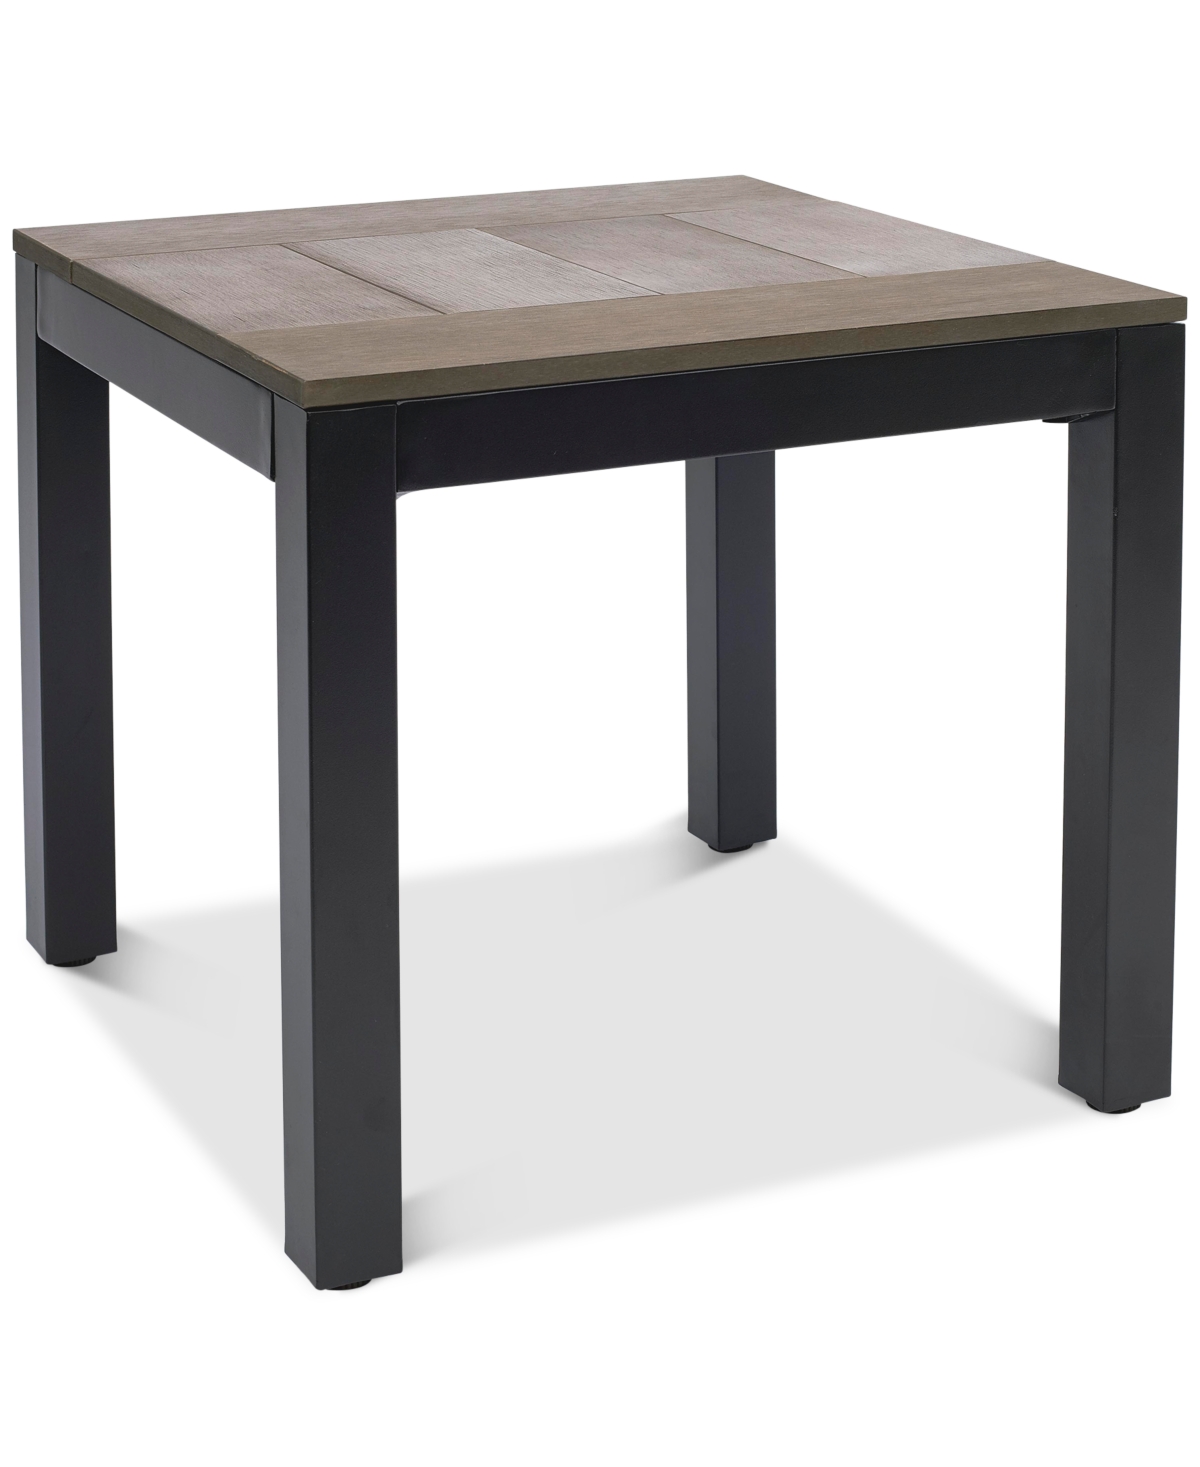 10397497 Stockholm Outdoor End Table, Created for Macys sku 10397497